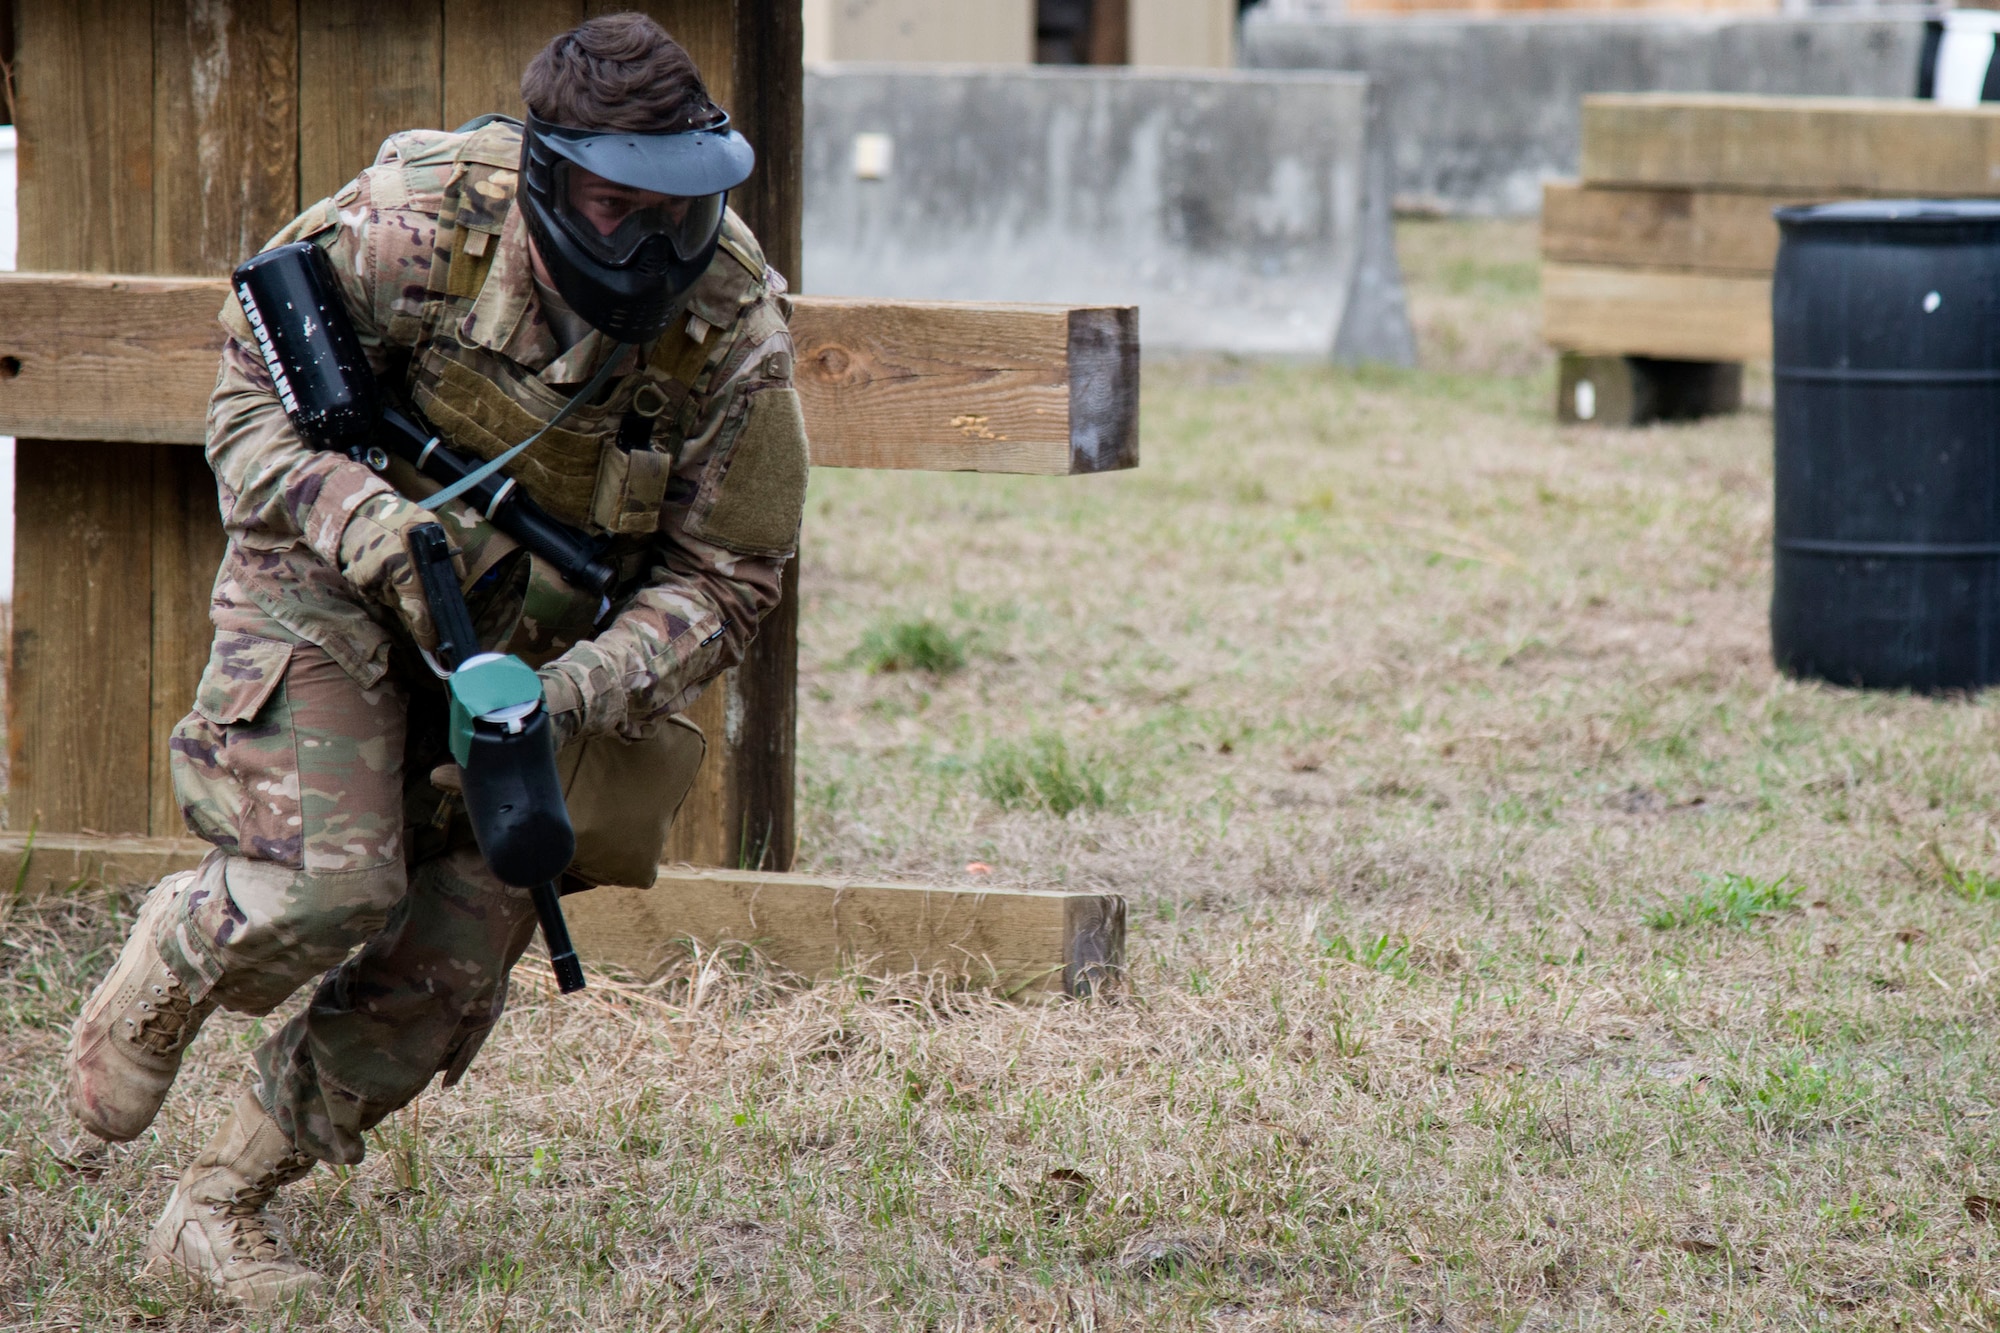 Airman 1st Class Elijah Bishop, 347th Operations Support Squadron intel analyst, runs to cover during a Tactical Combat Casualty Care course, Feb. 14, 2018, at Moody Air Force Base, Ga. The training is designed to teach Airmen how to apply critical life-saving skills while engaged in a combat environment. (U.S. Air Force photo by Airman 1st Class Erick Requadt)